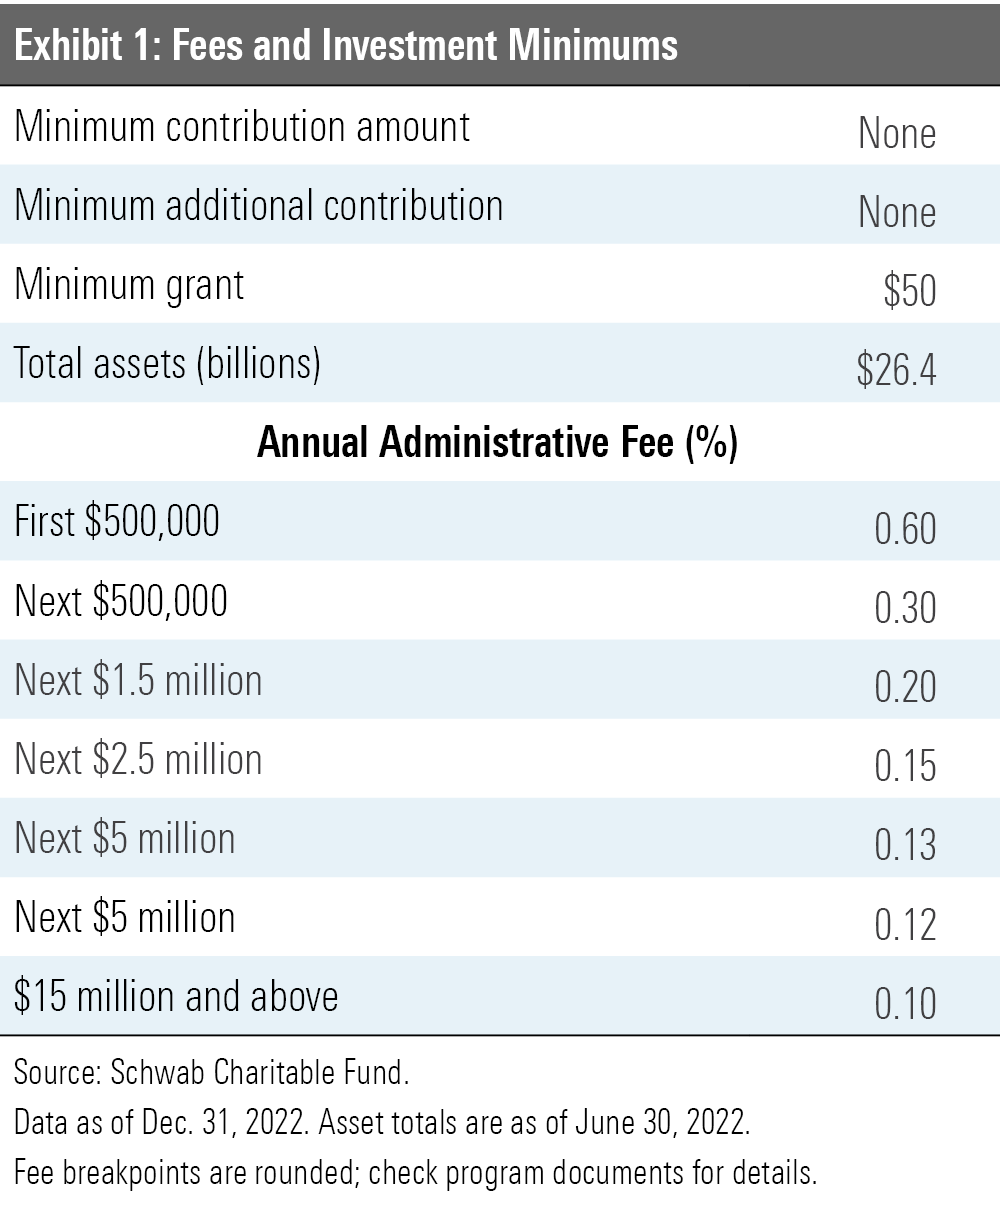 A table showing key facts about Schwab Charitable Fund, including minimum contribution amounts and administrative fees.